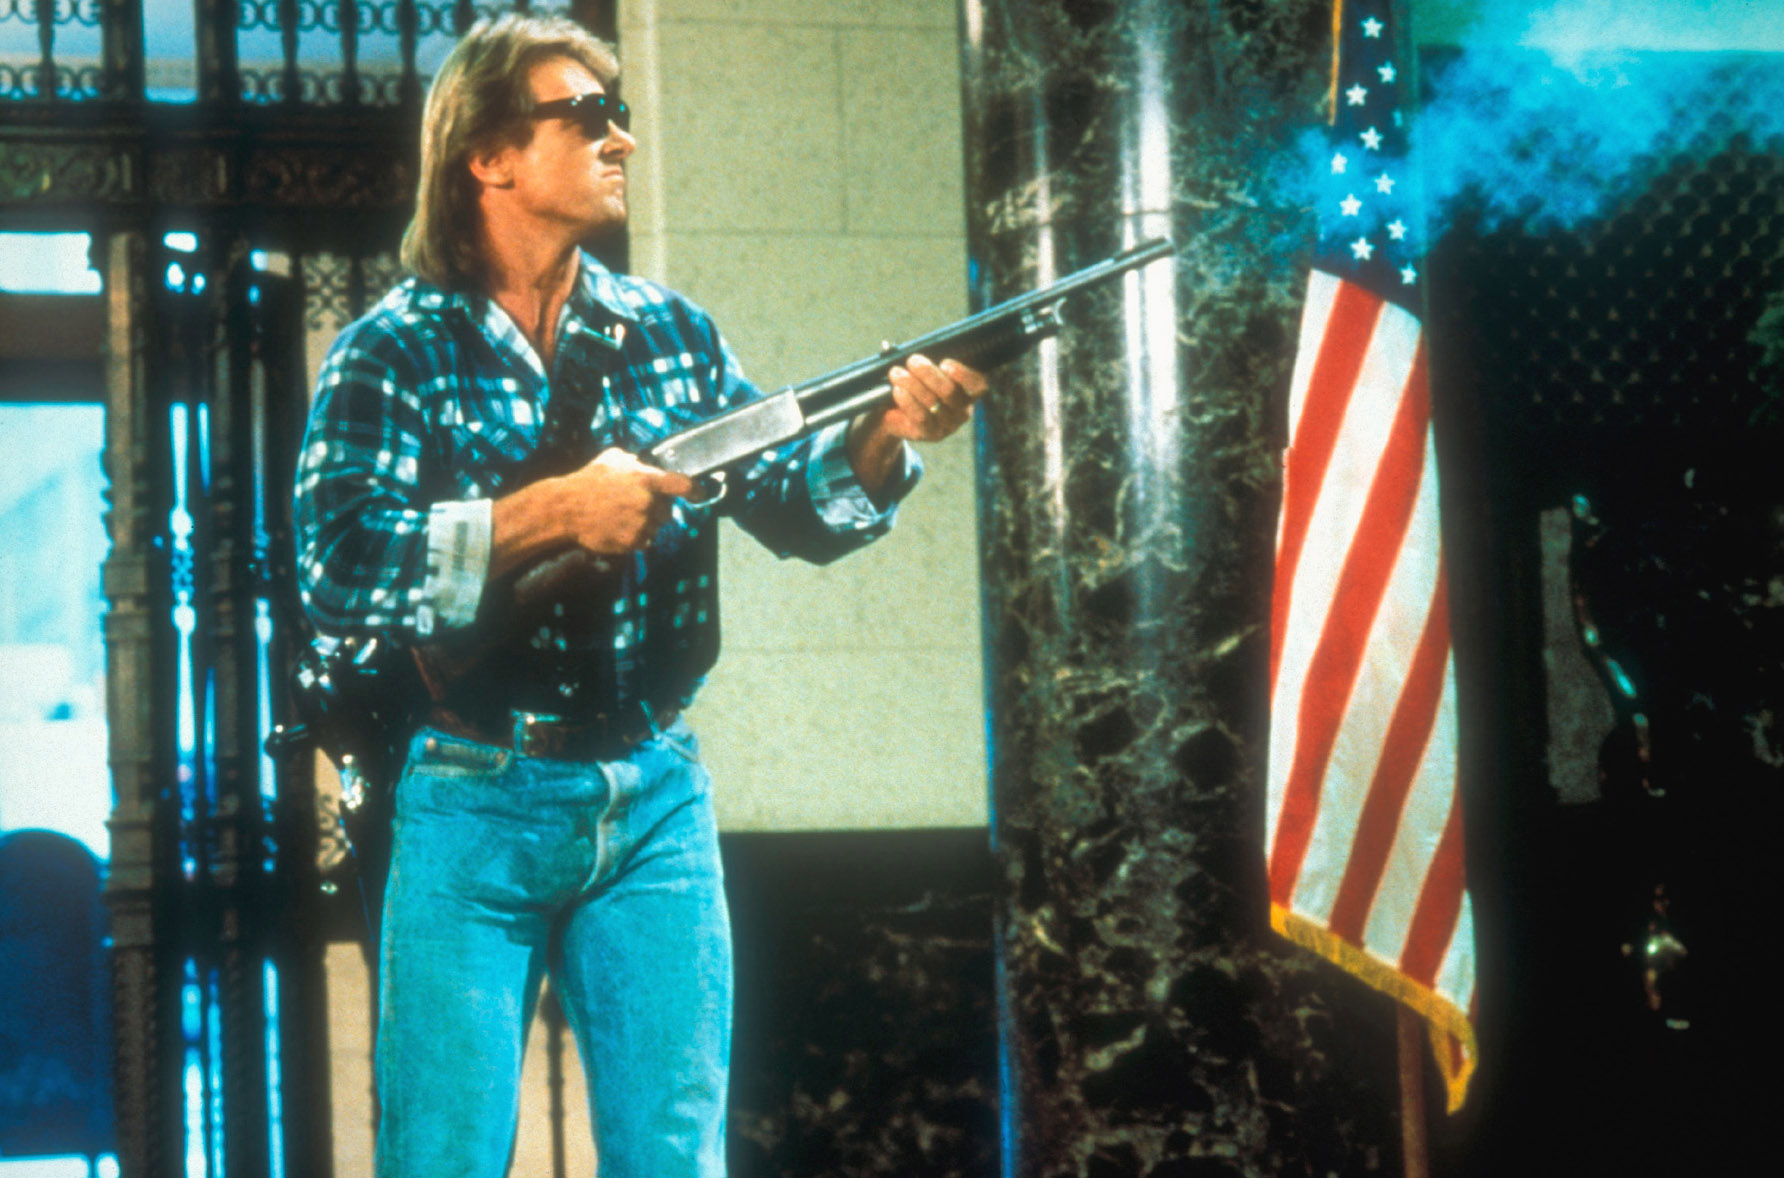 scene from the 1988 movie "They Live." Roddy Piper's character, Nada, has entered a building and is standing next to an American flag. He is wearing a plaid shirt, jeans and dark sunglasses and firing a rifle at the aliens he is able to see with those glasses.